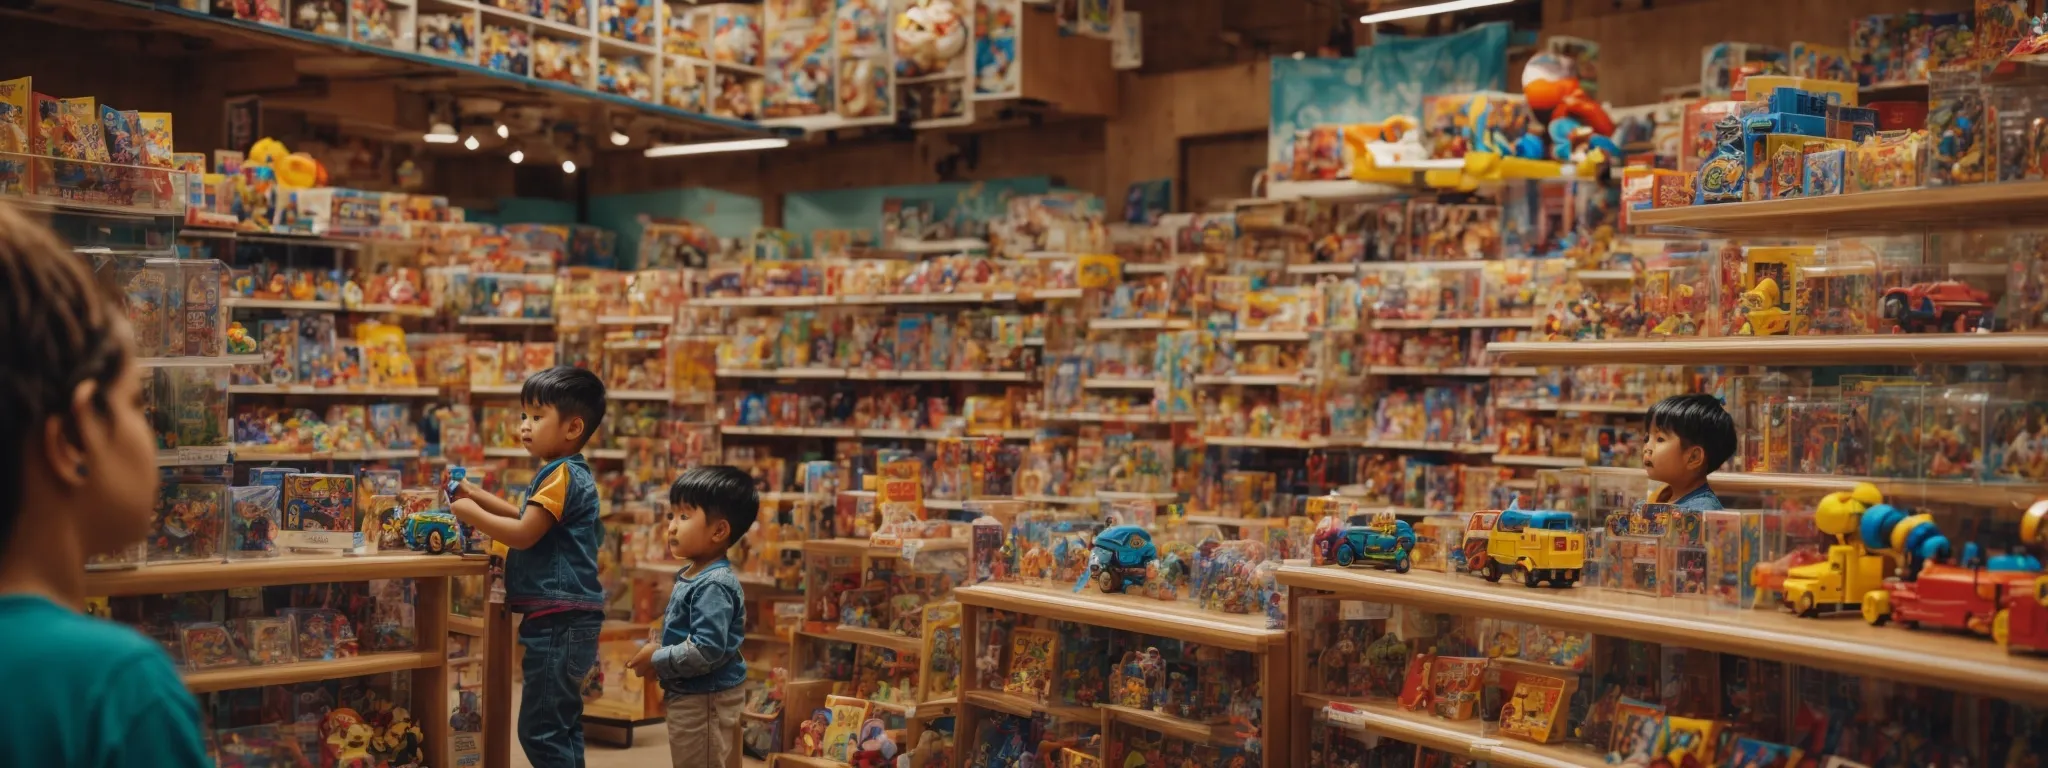 a bustling toy store with crowded shelves displaying a variety of colorful toys, with a gleeful child browsing in the background.